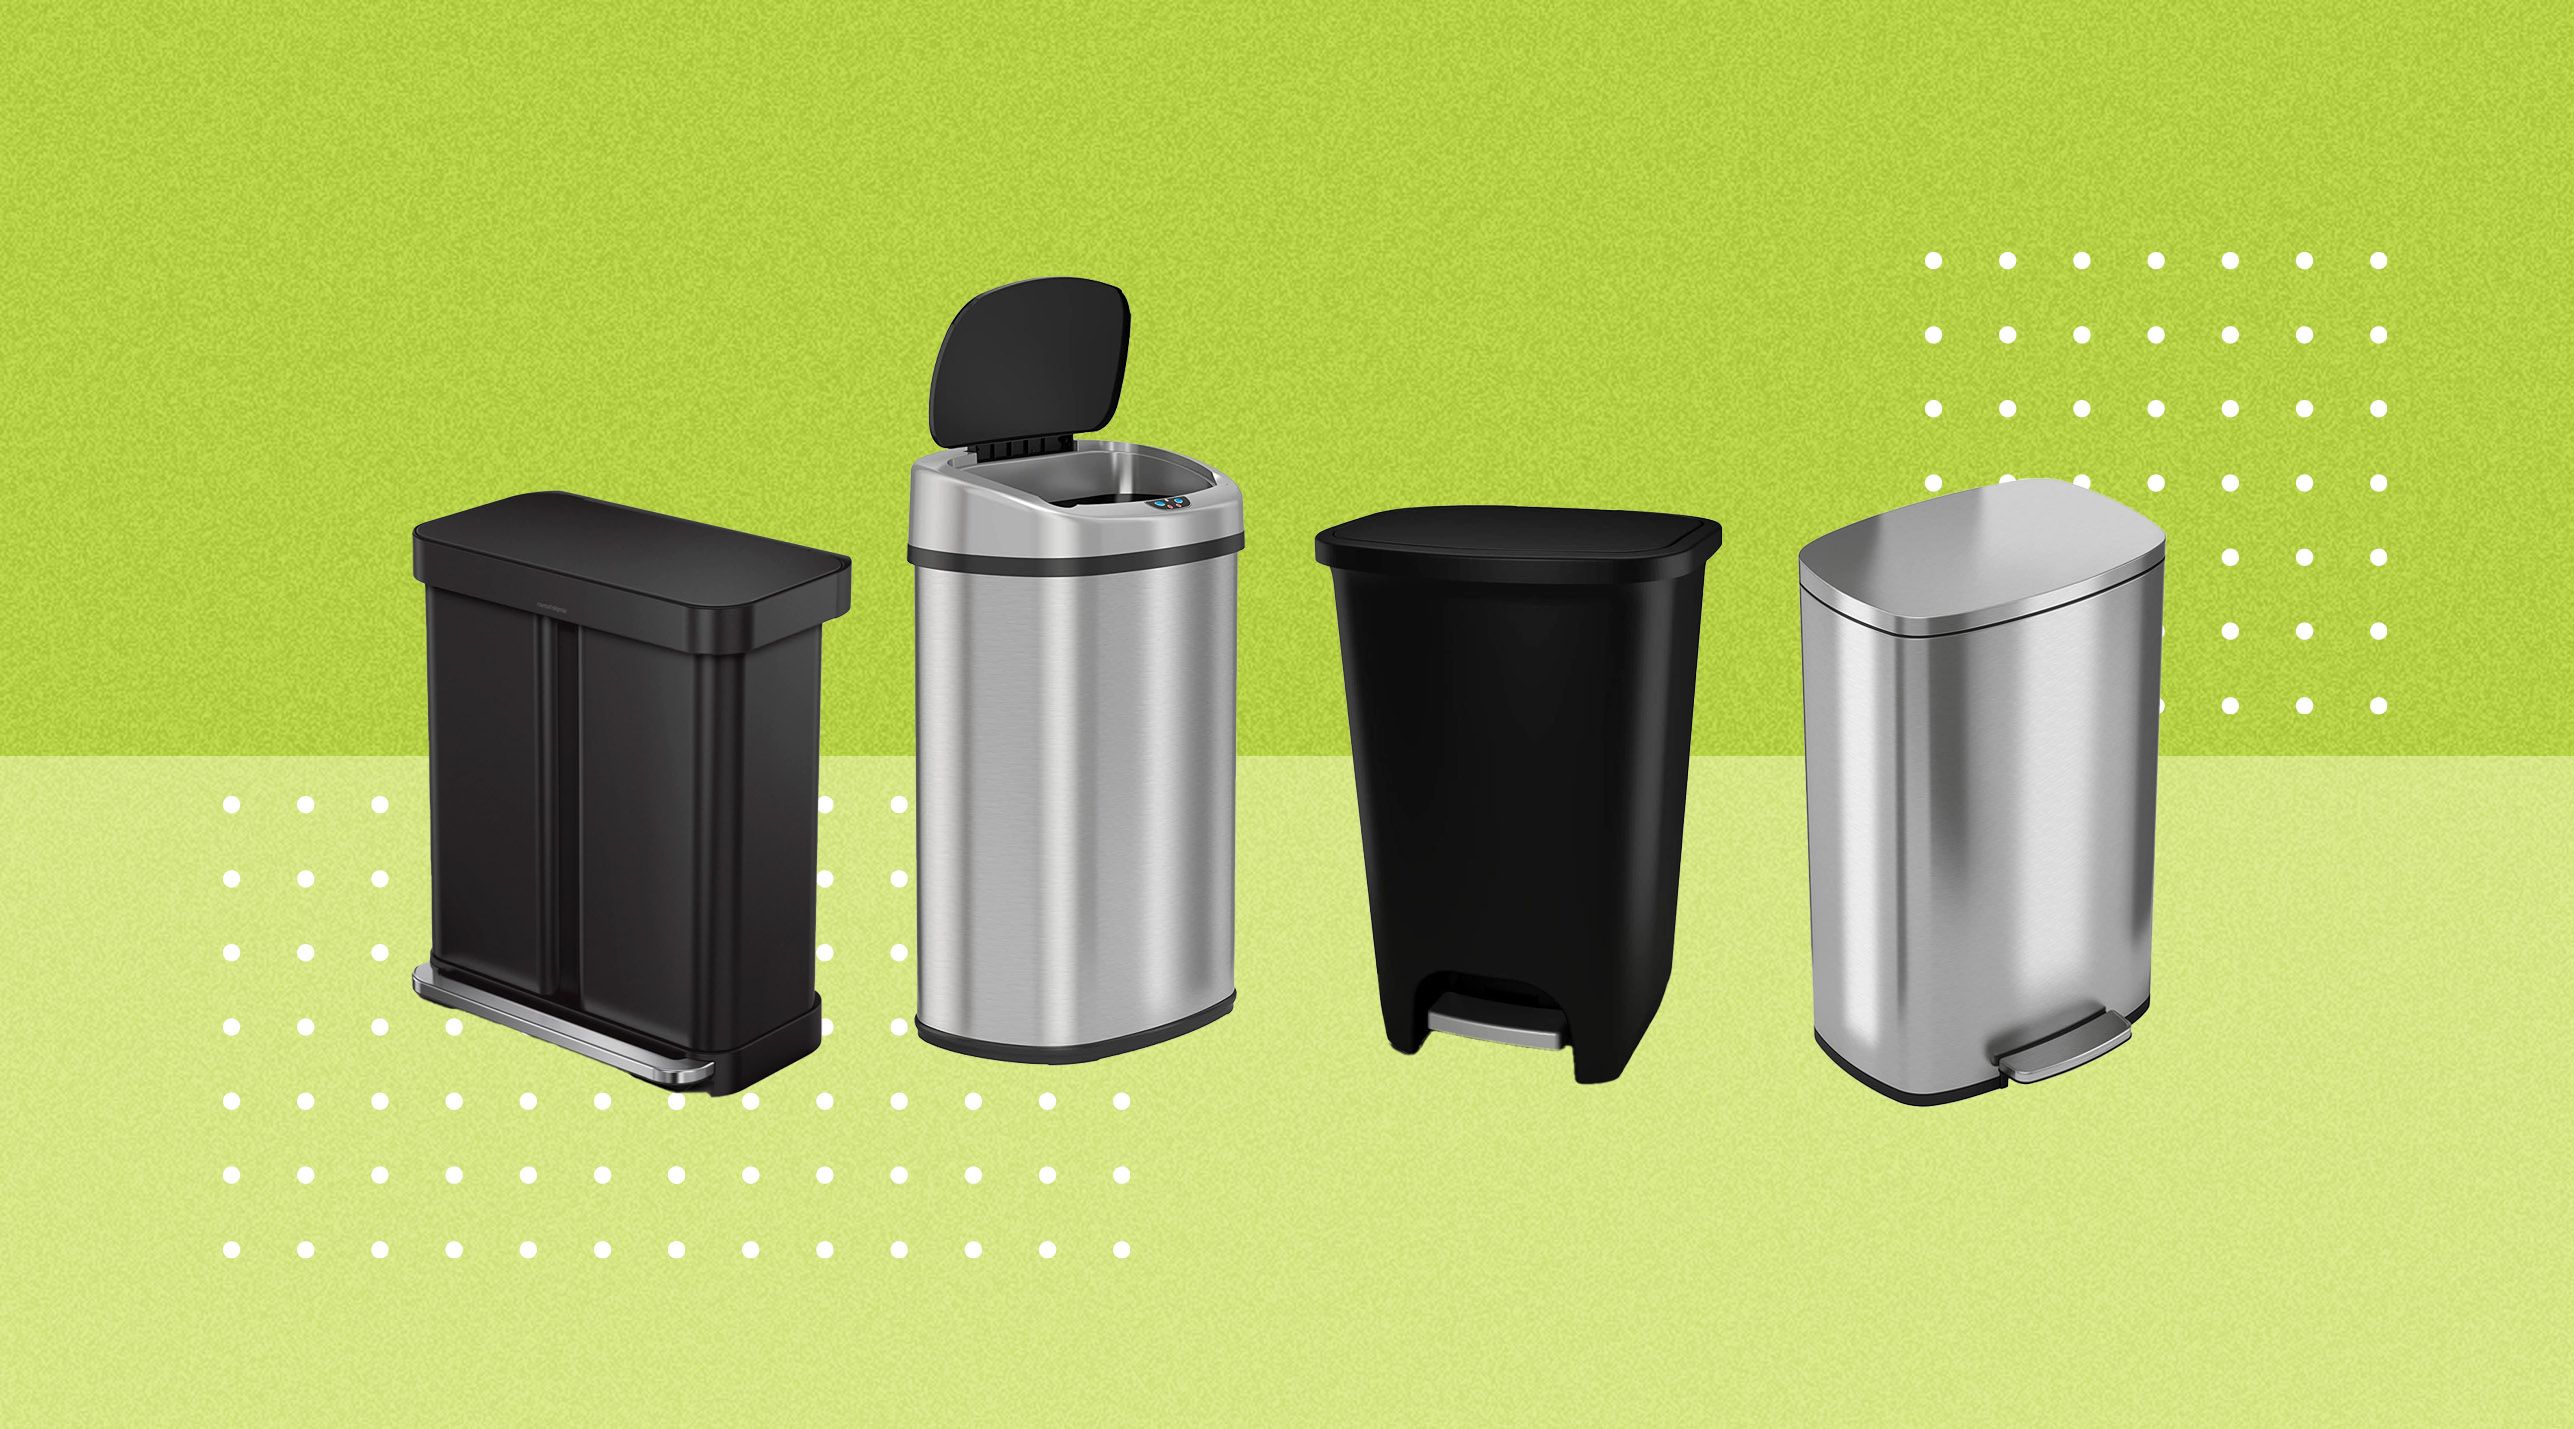 The 9 Best Kitchen Trash Cans